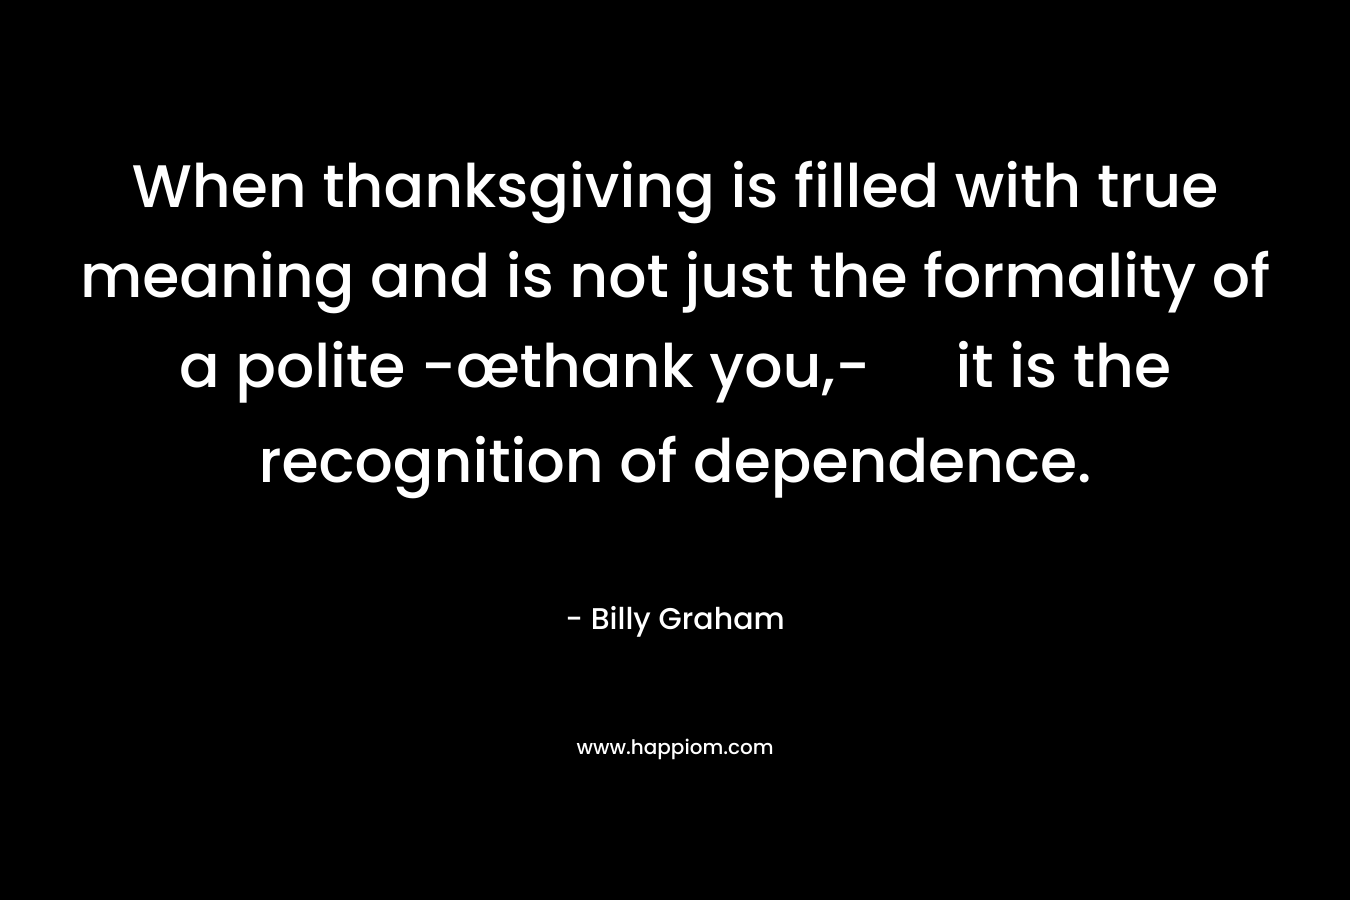 When thanksgiving is filled with true meaning and is not just the formality of a polite -œthank you,- it is the recognition of dependence. – Billy Graham